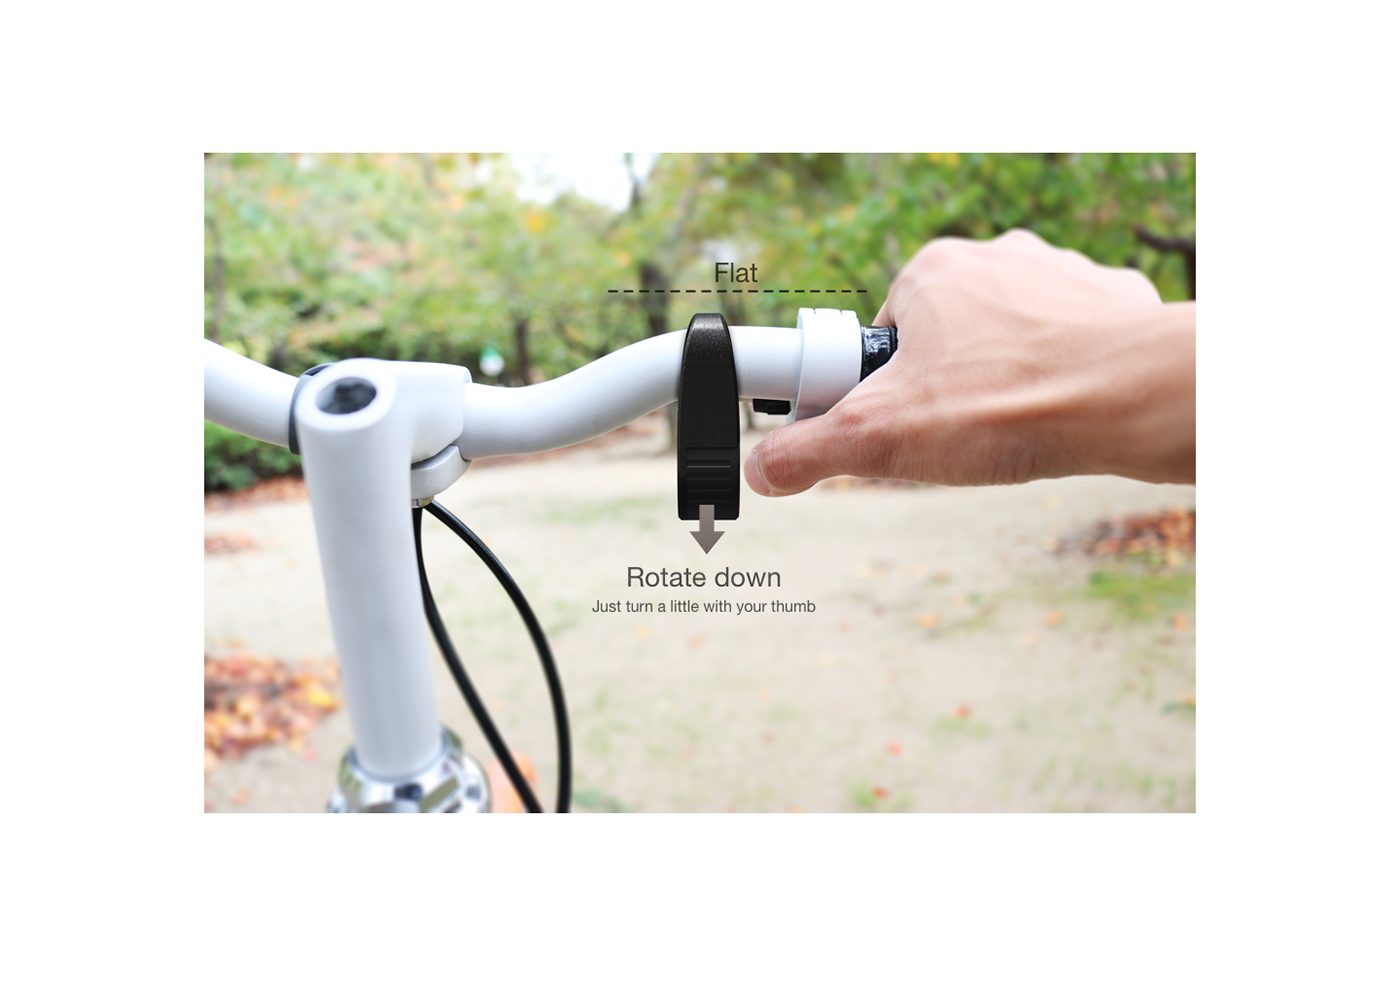 product Bicycle bell mechanism metal structure logical flat minimal design